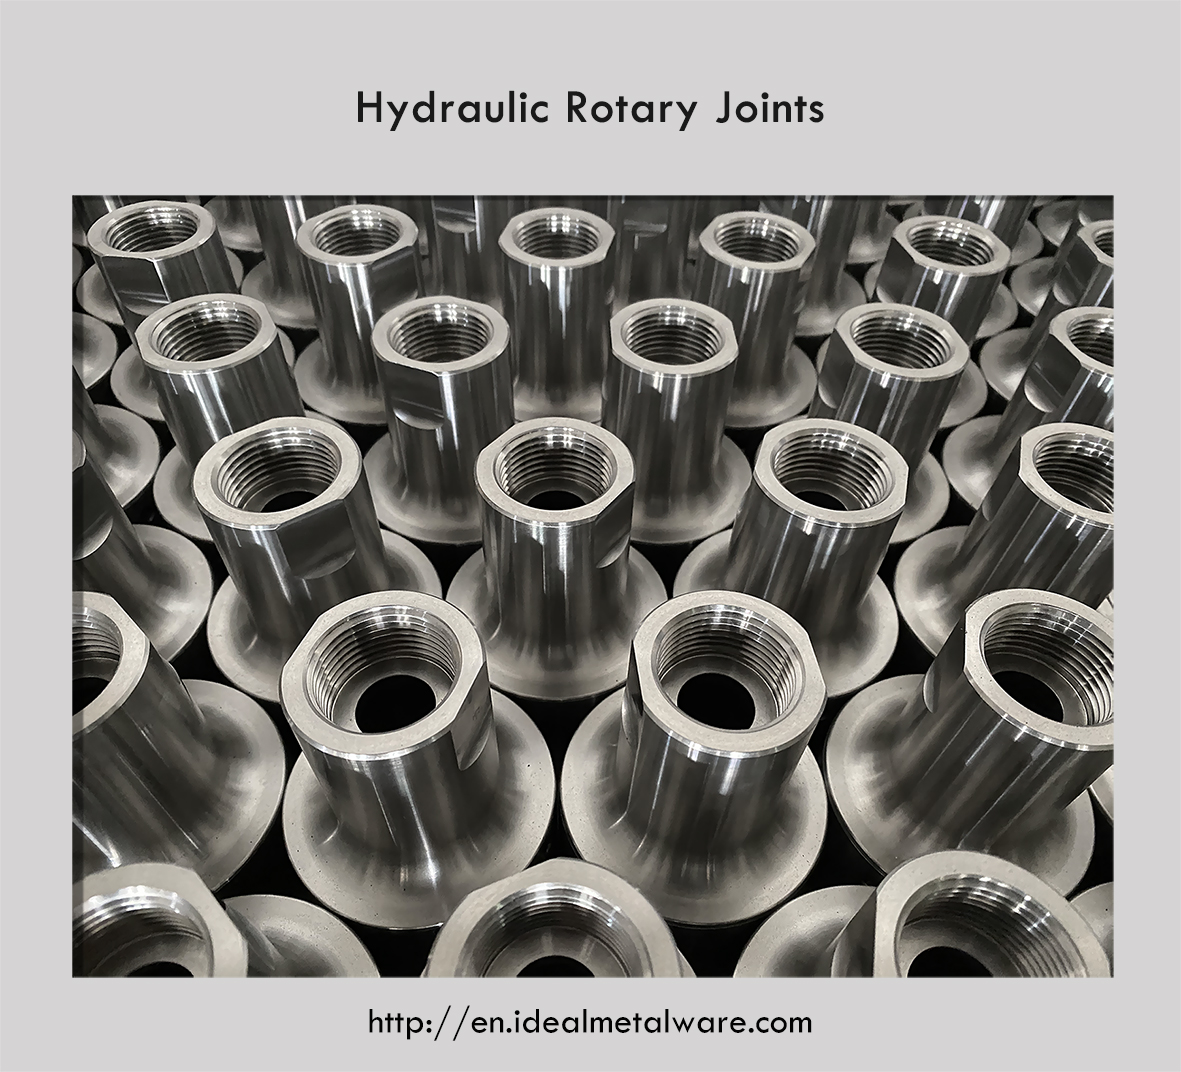 Hydraulic Rotary Joints - xiao.jpg